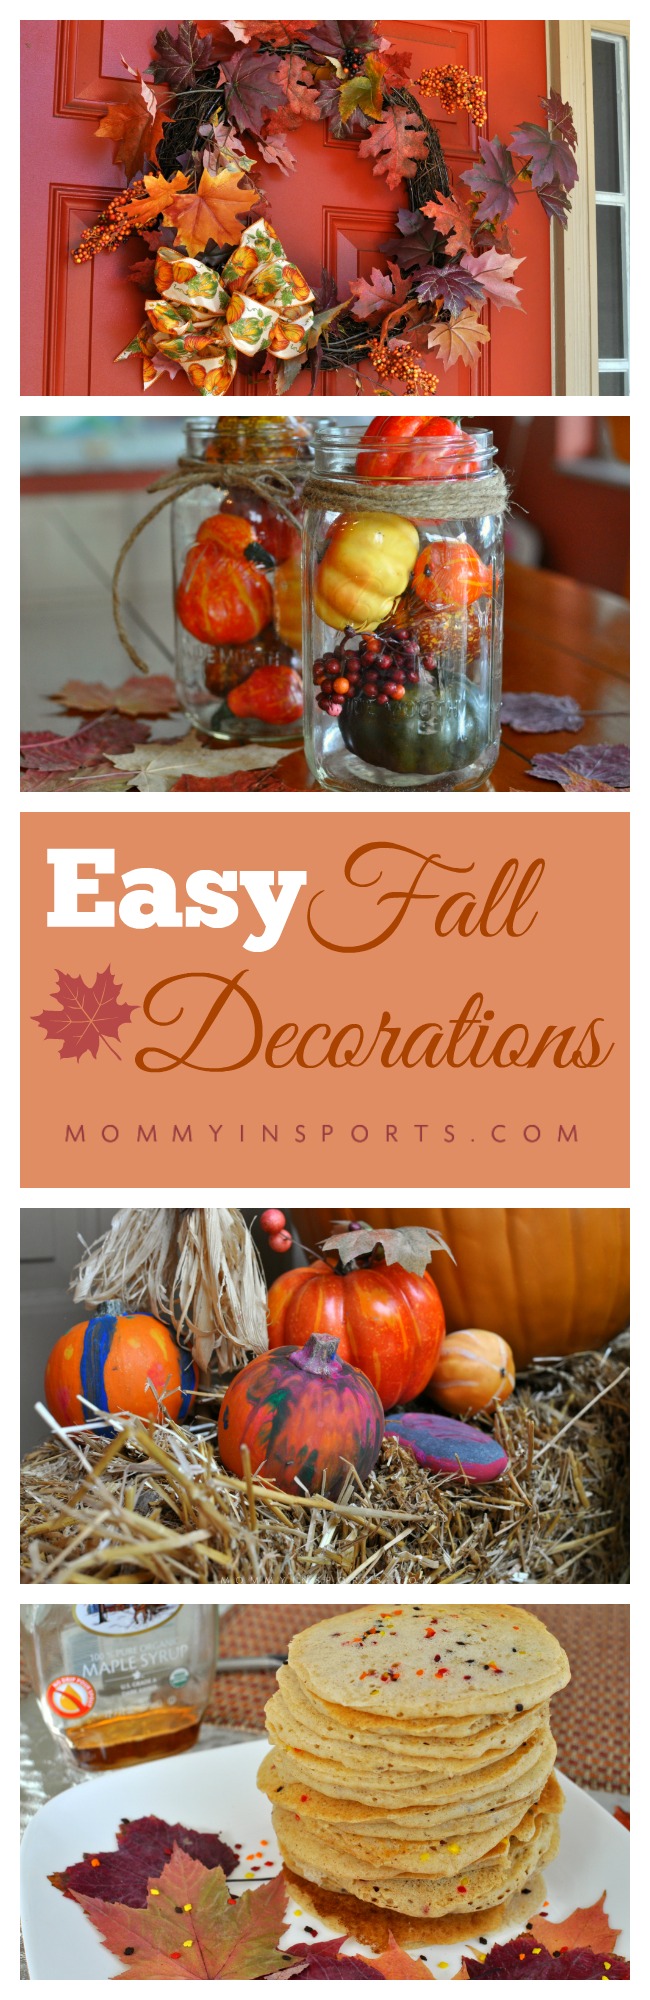 Easy Fall Decorations pin